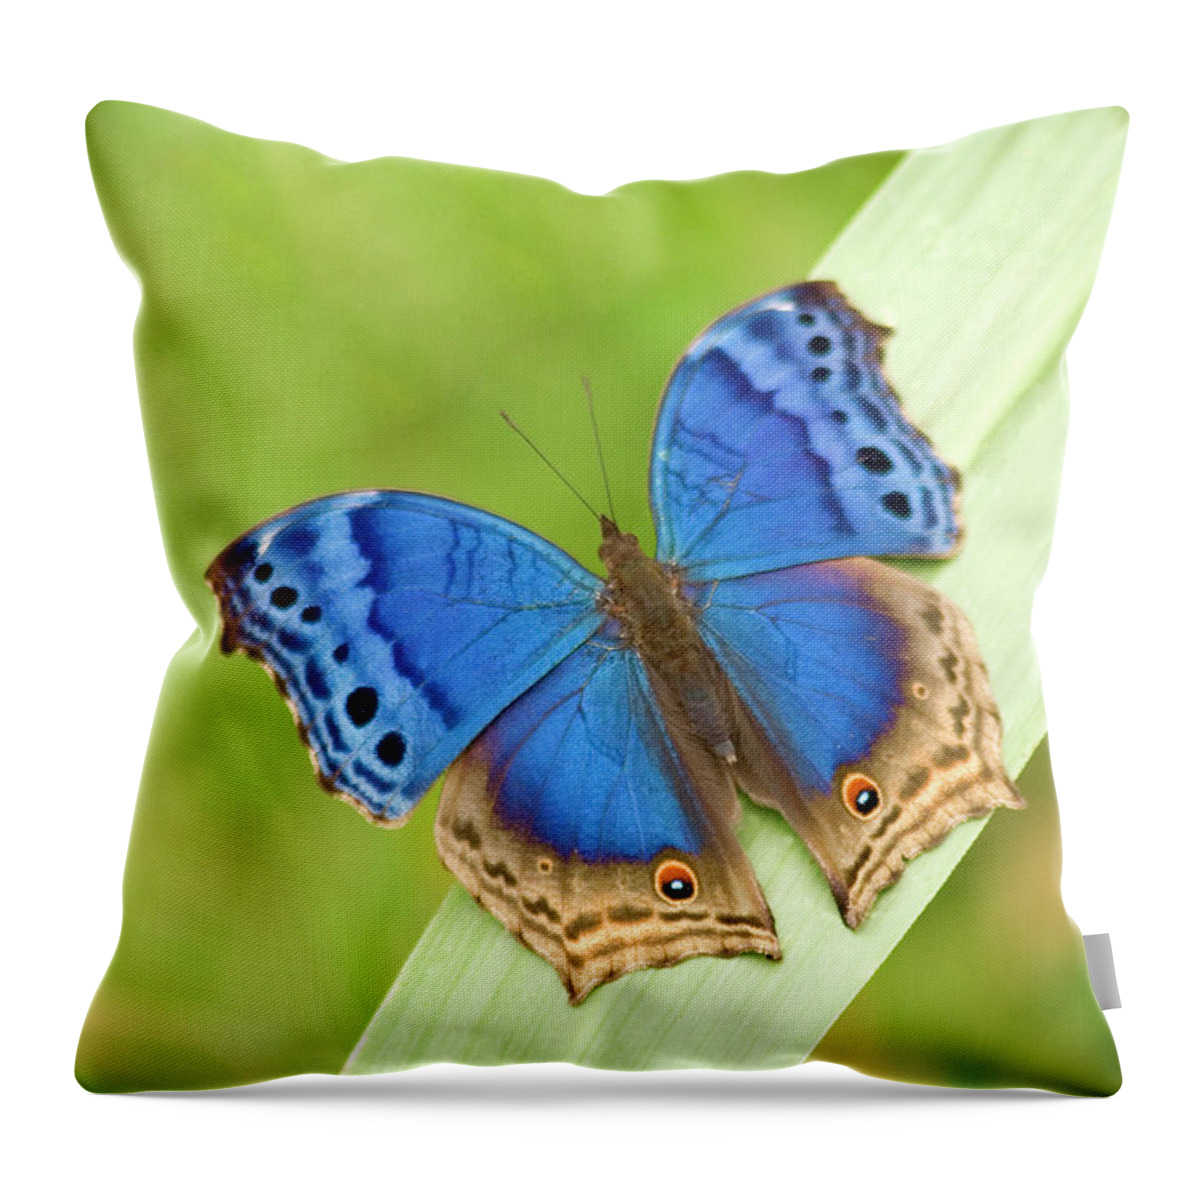 Grass Throw Pillow featuring the photograph Blue Salamis Butterfly by Soopysue